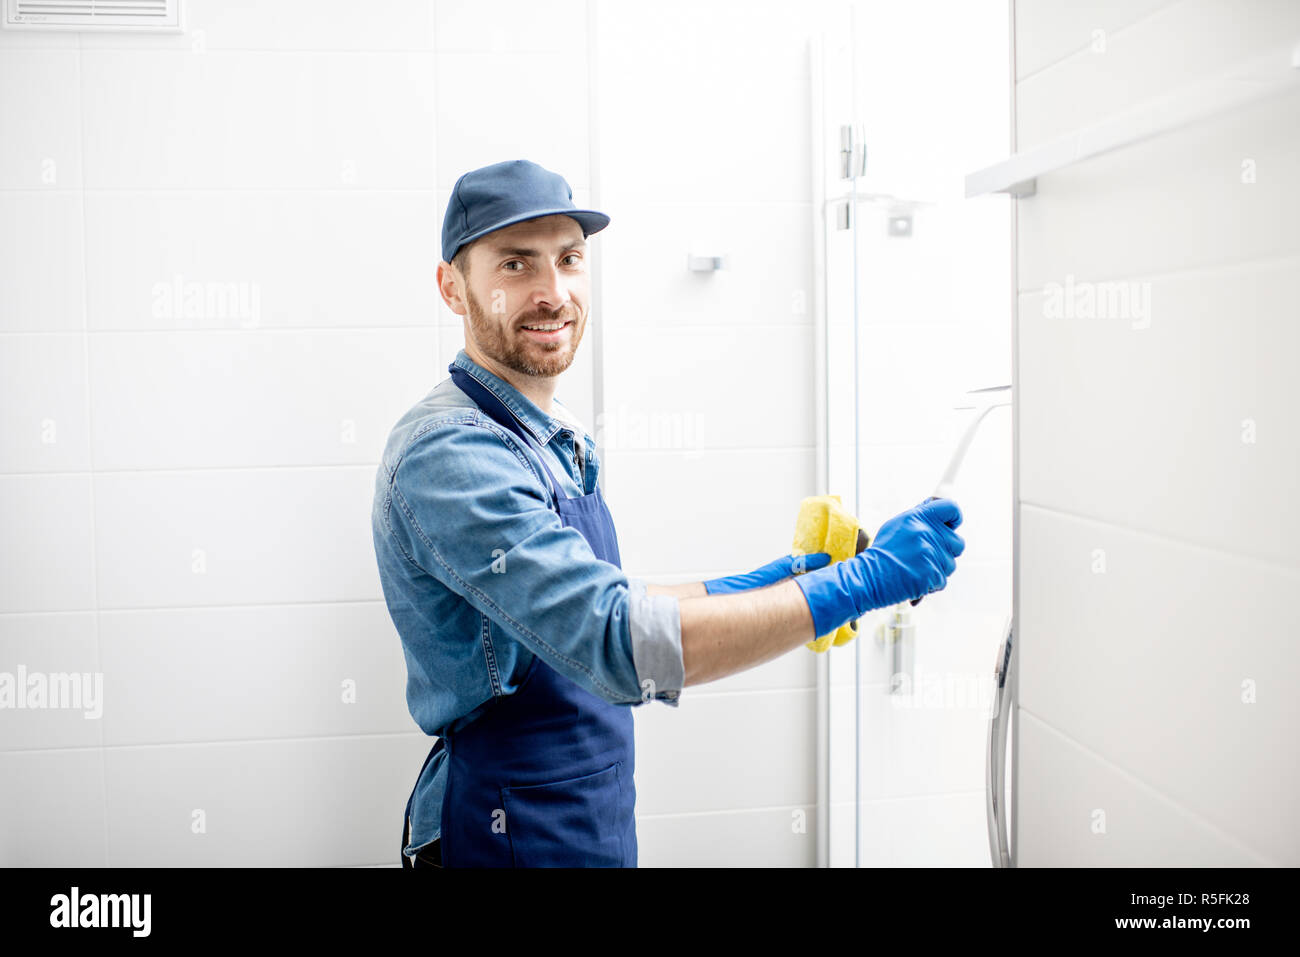 Man as professional cleaner wiping the shower door with cotton wiper in the white bathroom Stock Photo